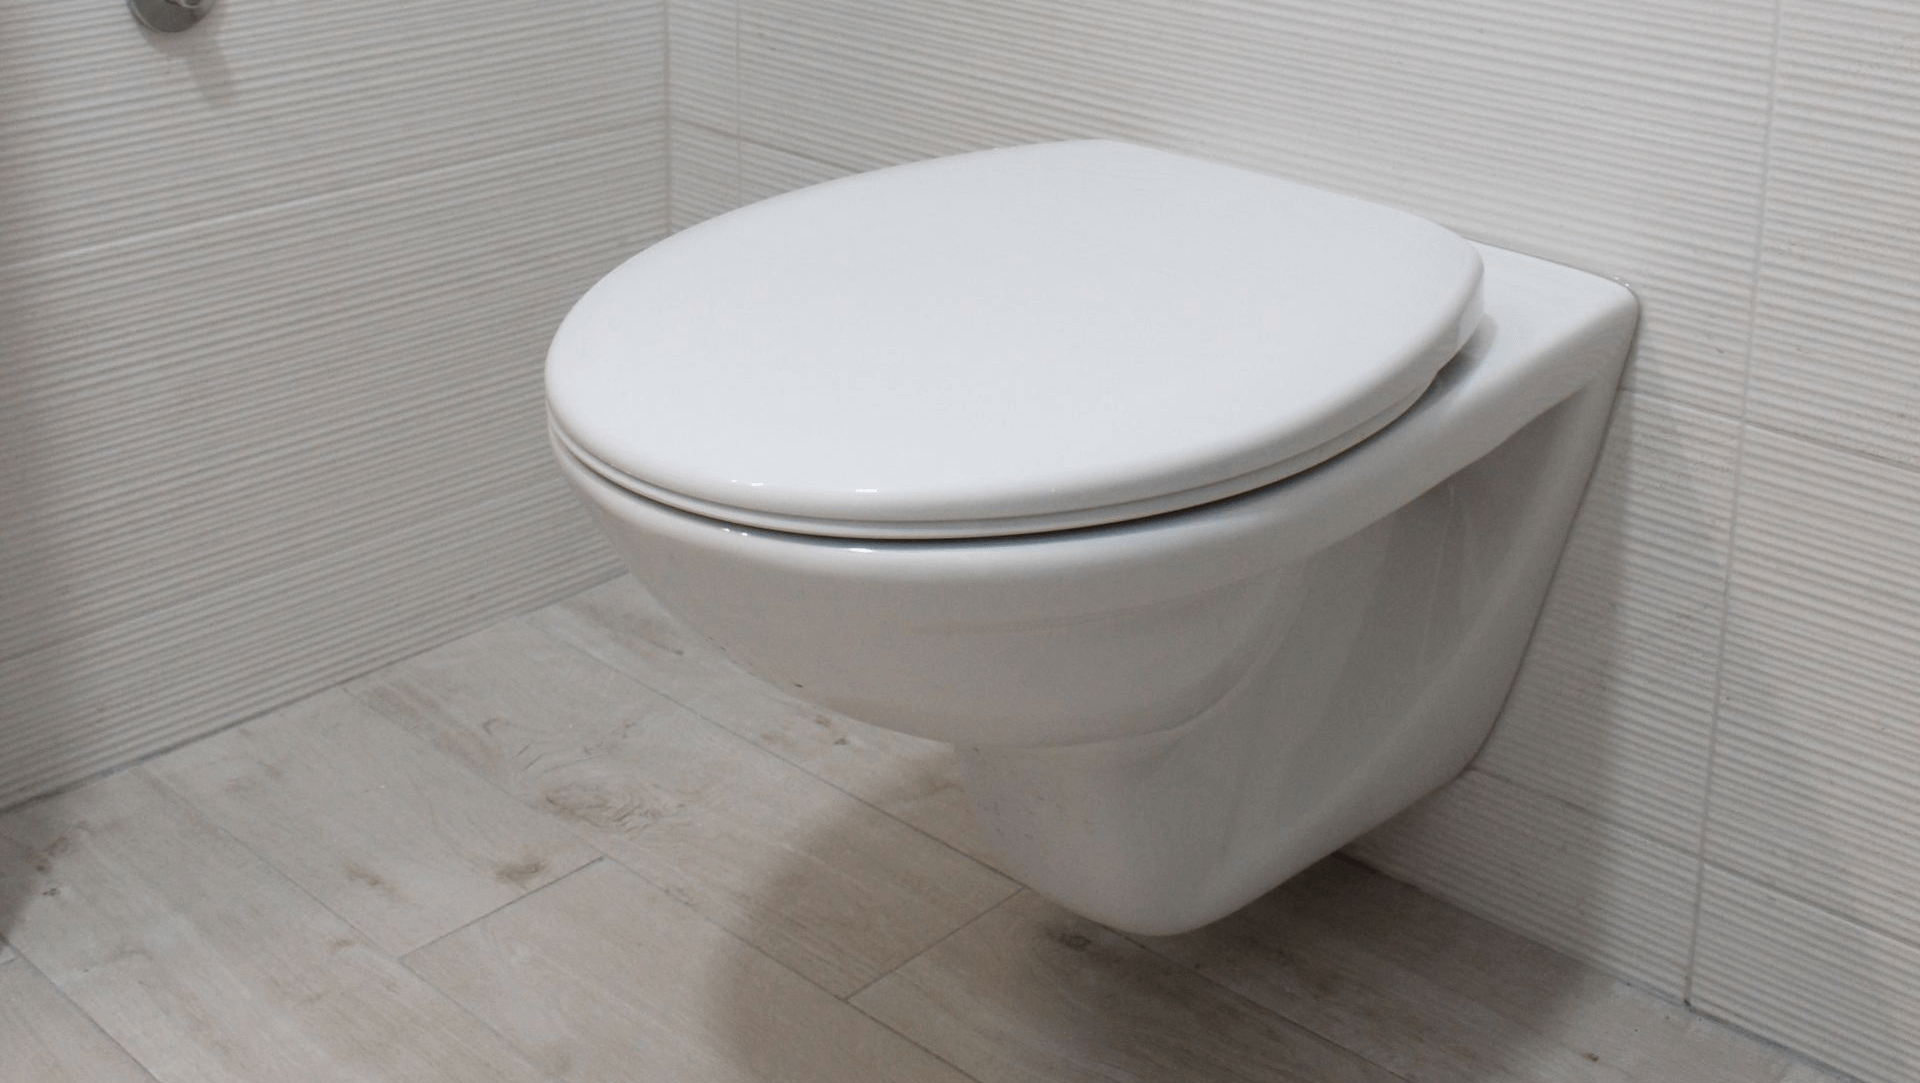 How to Install a Toilet Bowl